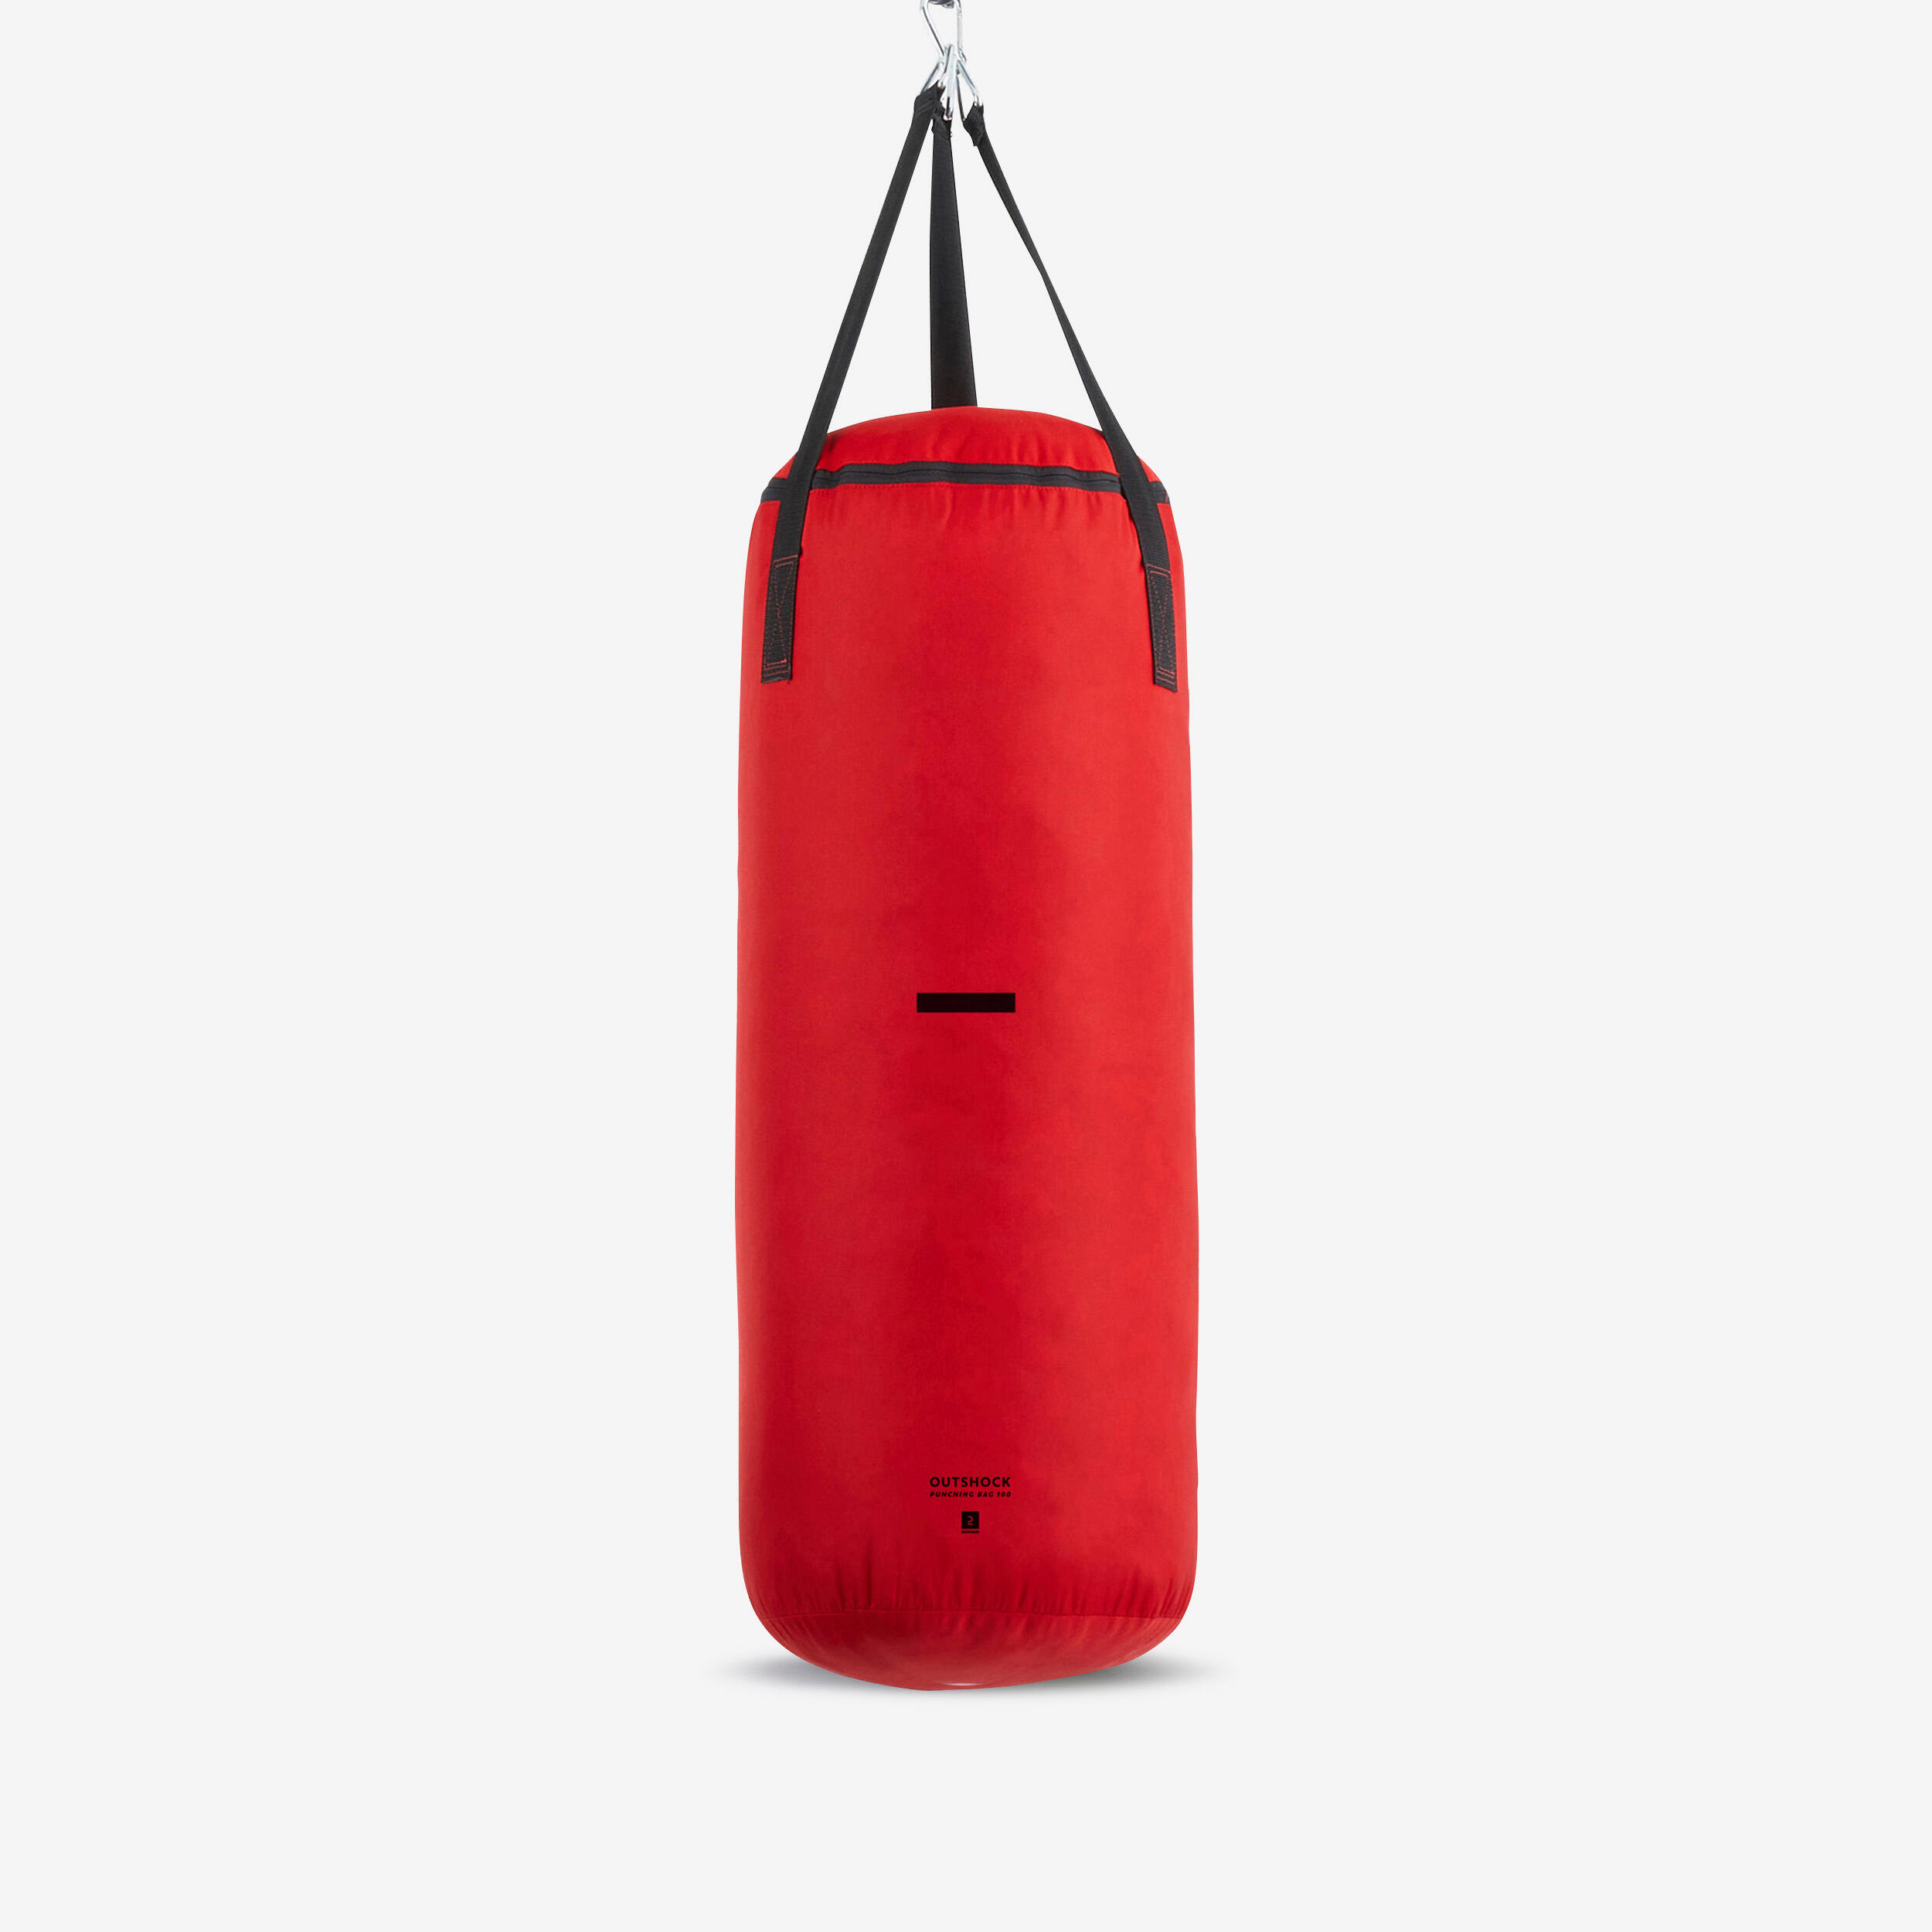 Discover more than 152 punching bag super hot